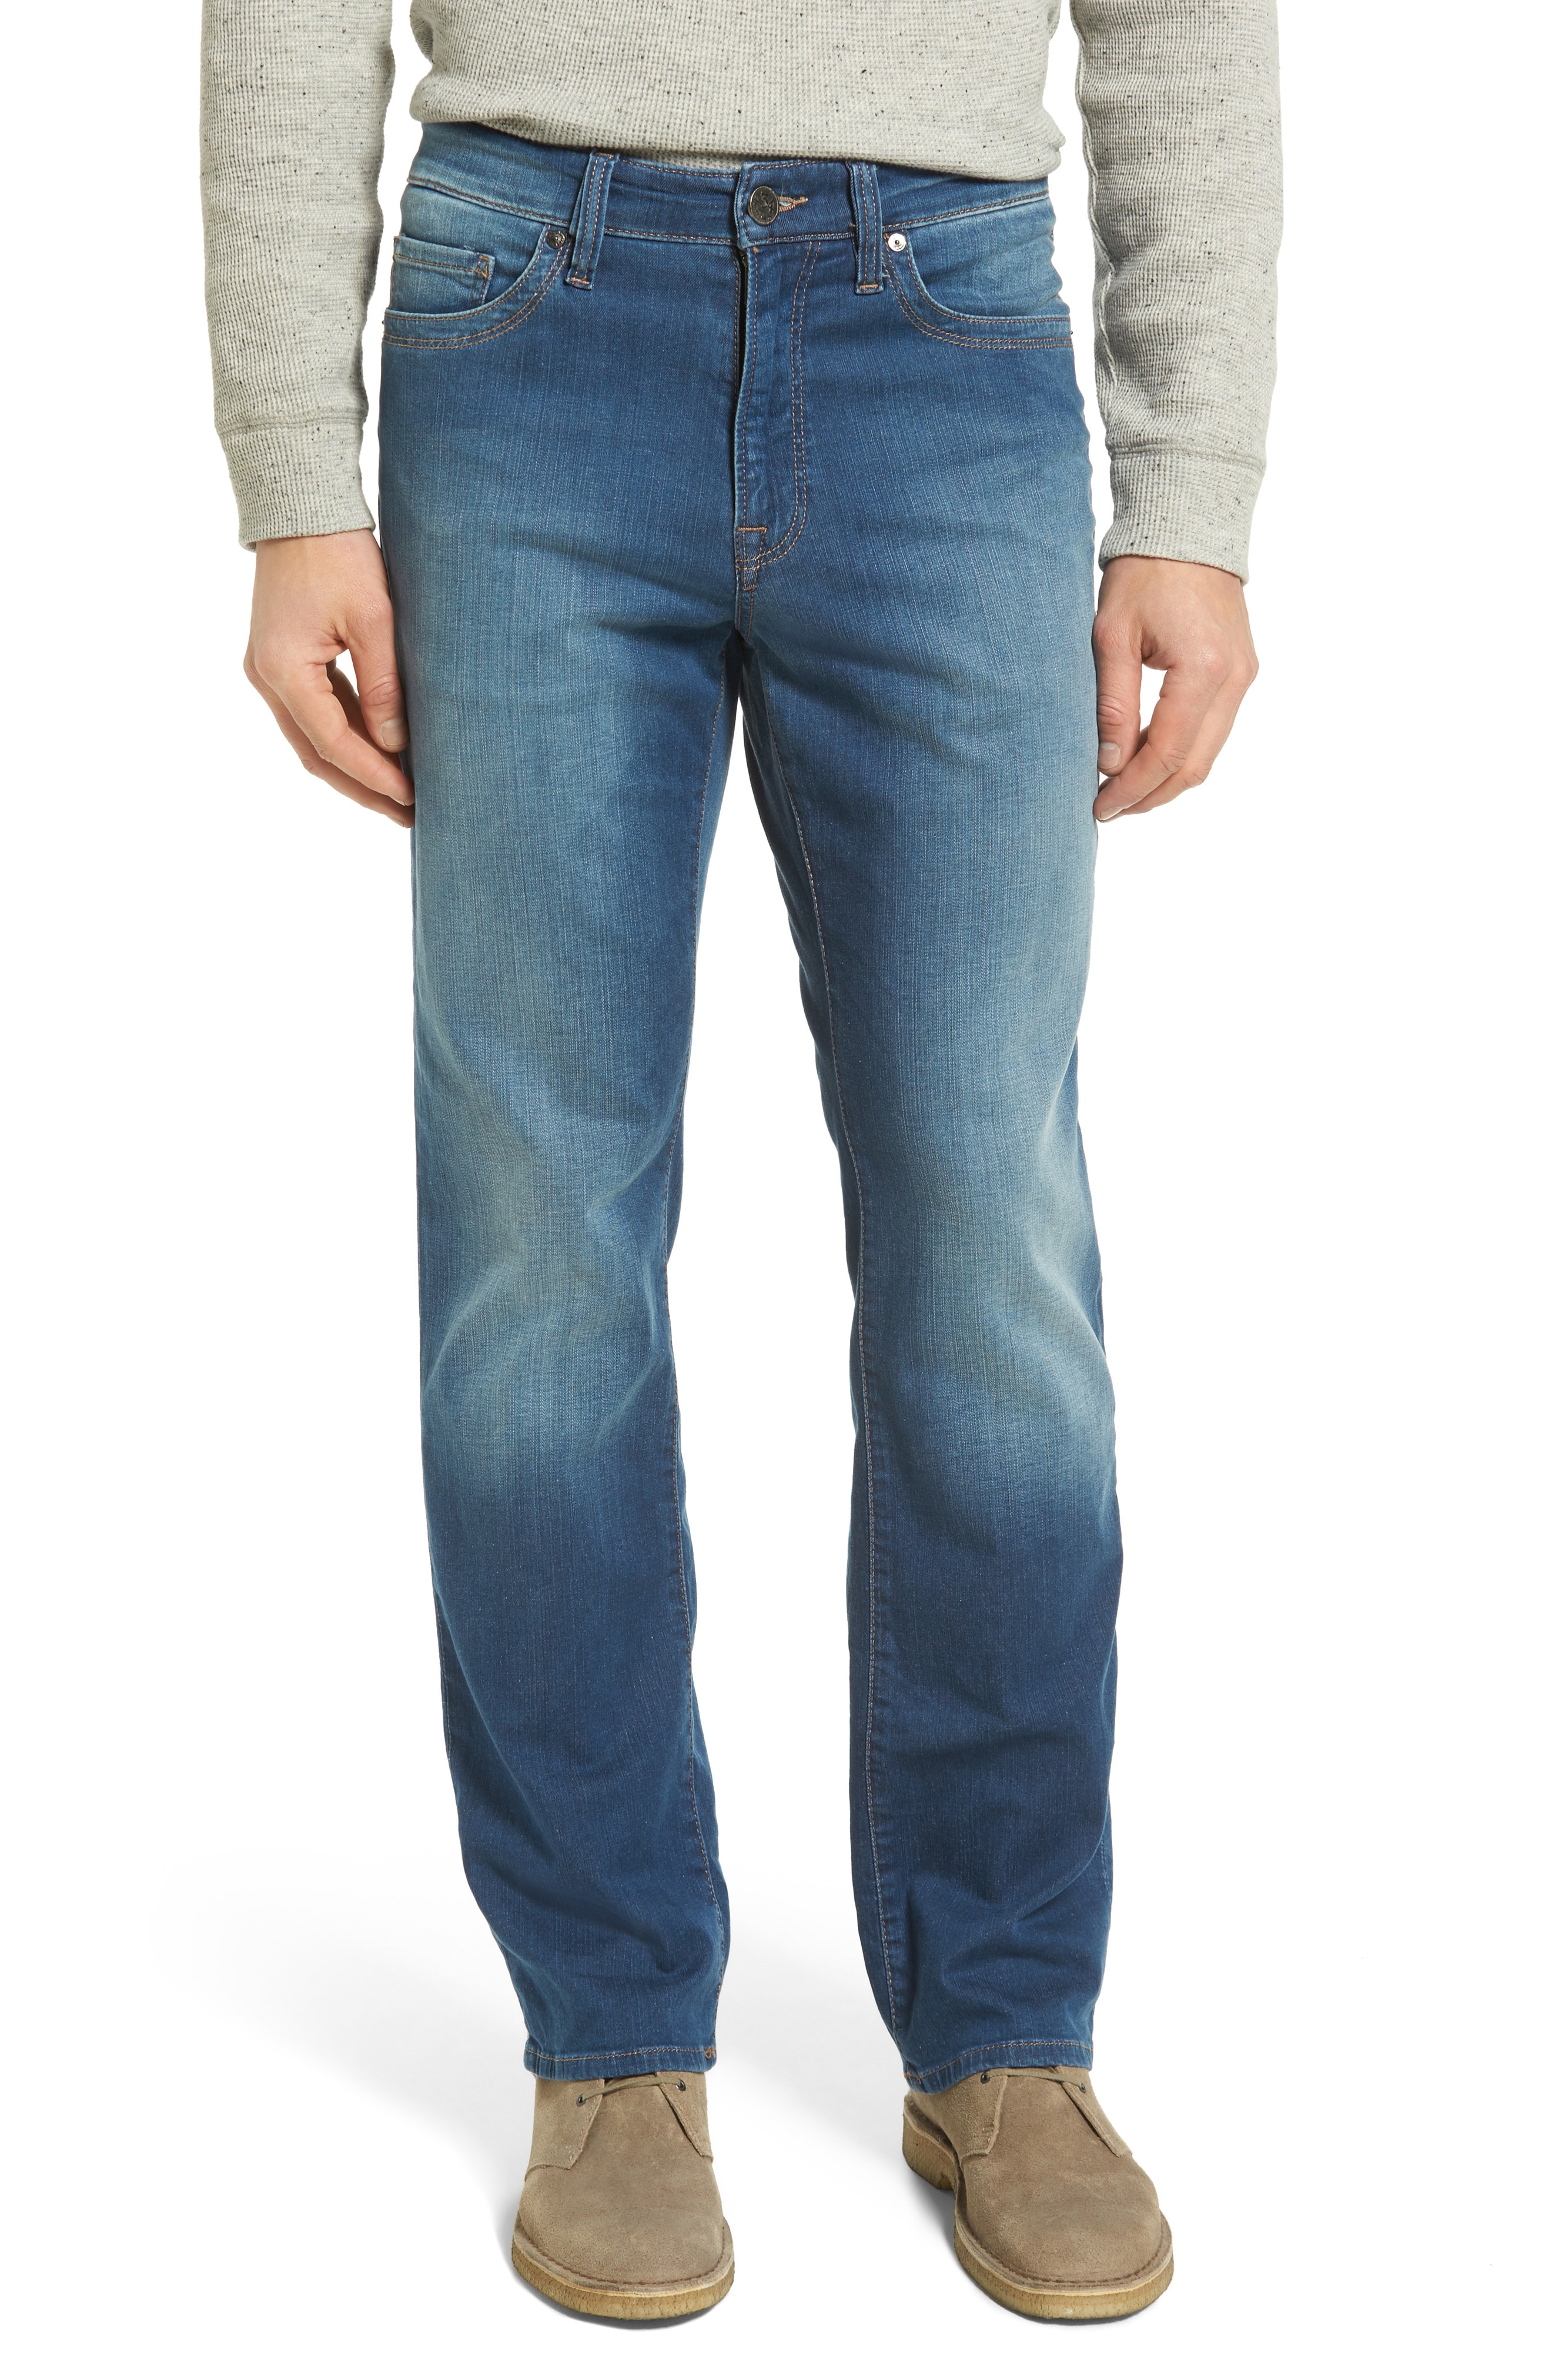 34 Heritage 'Charisma' Classic Relaxed Fit Jeans (Mid Cashmere) (Online Only) (Regular & Tall)